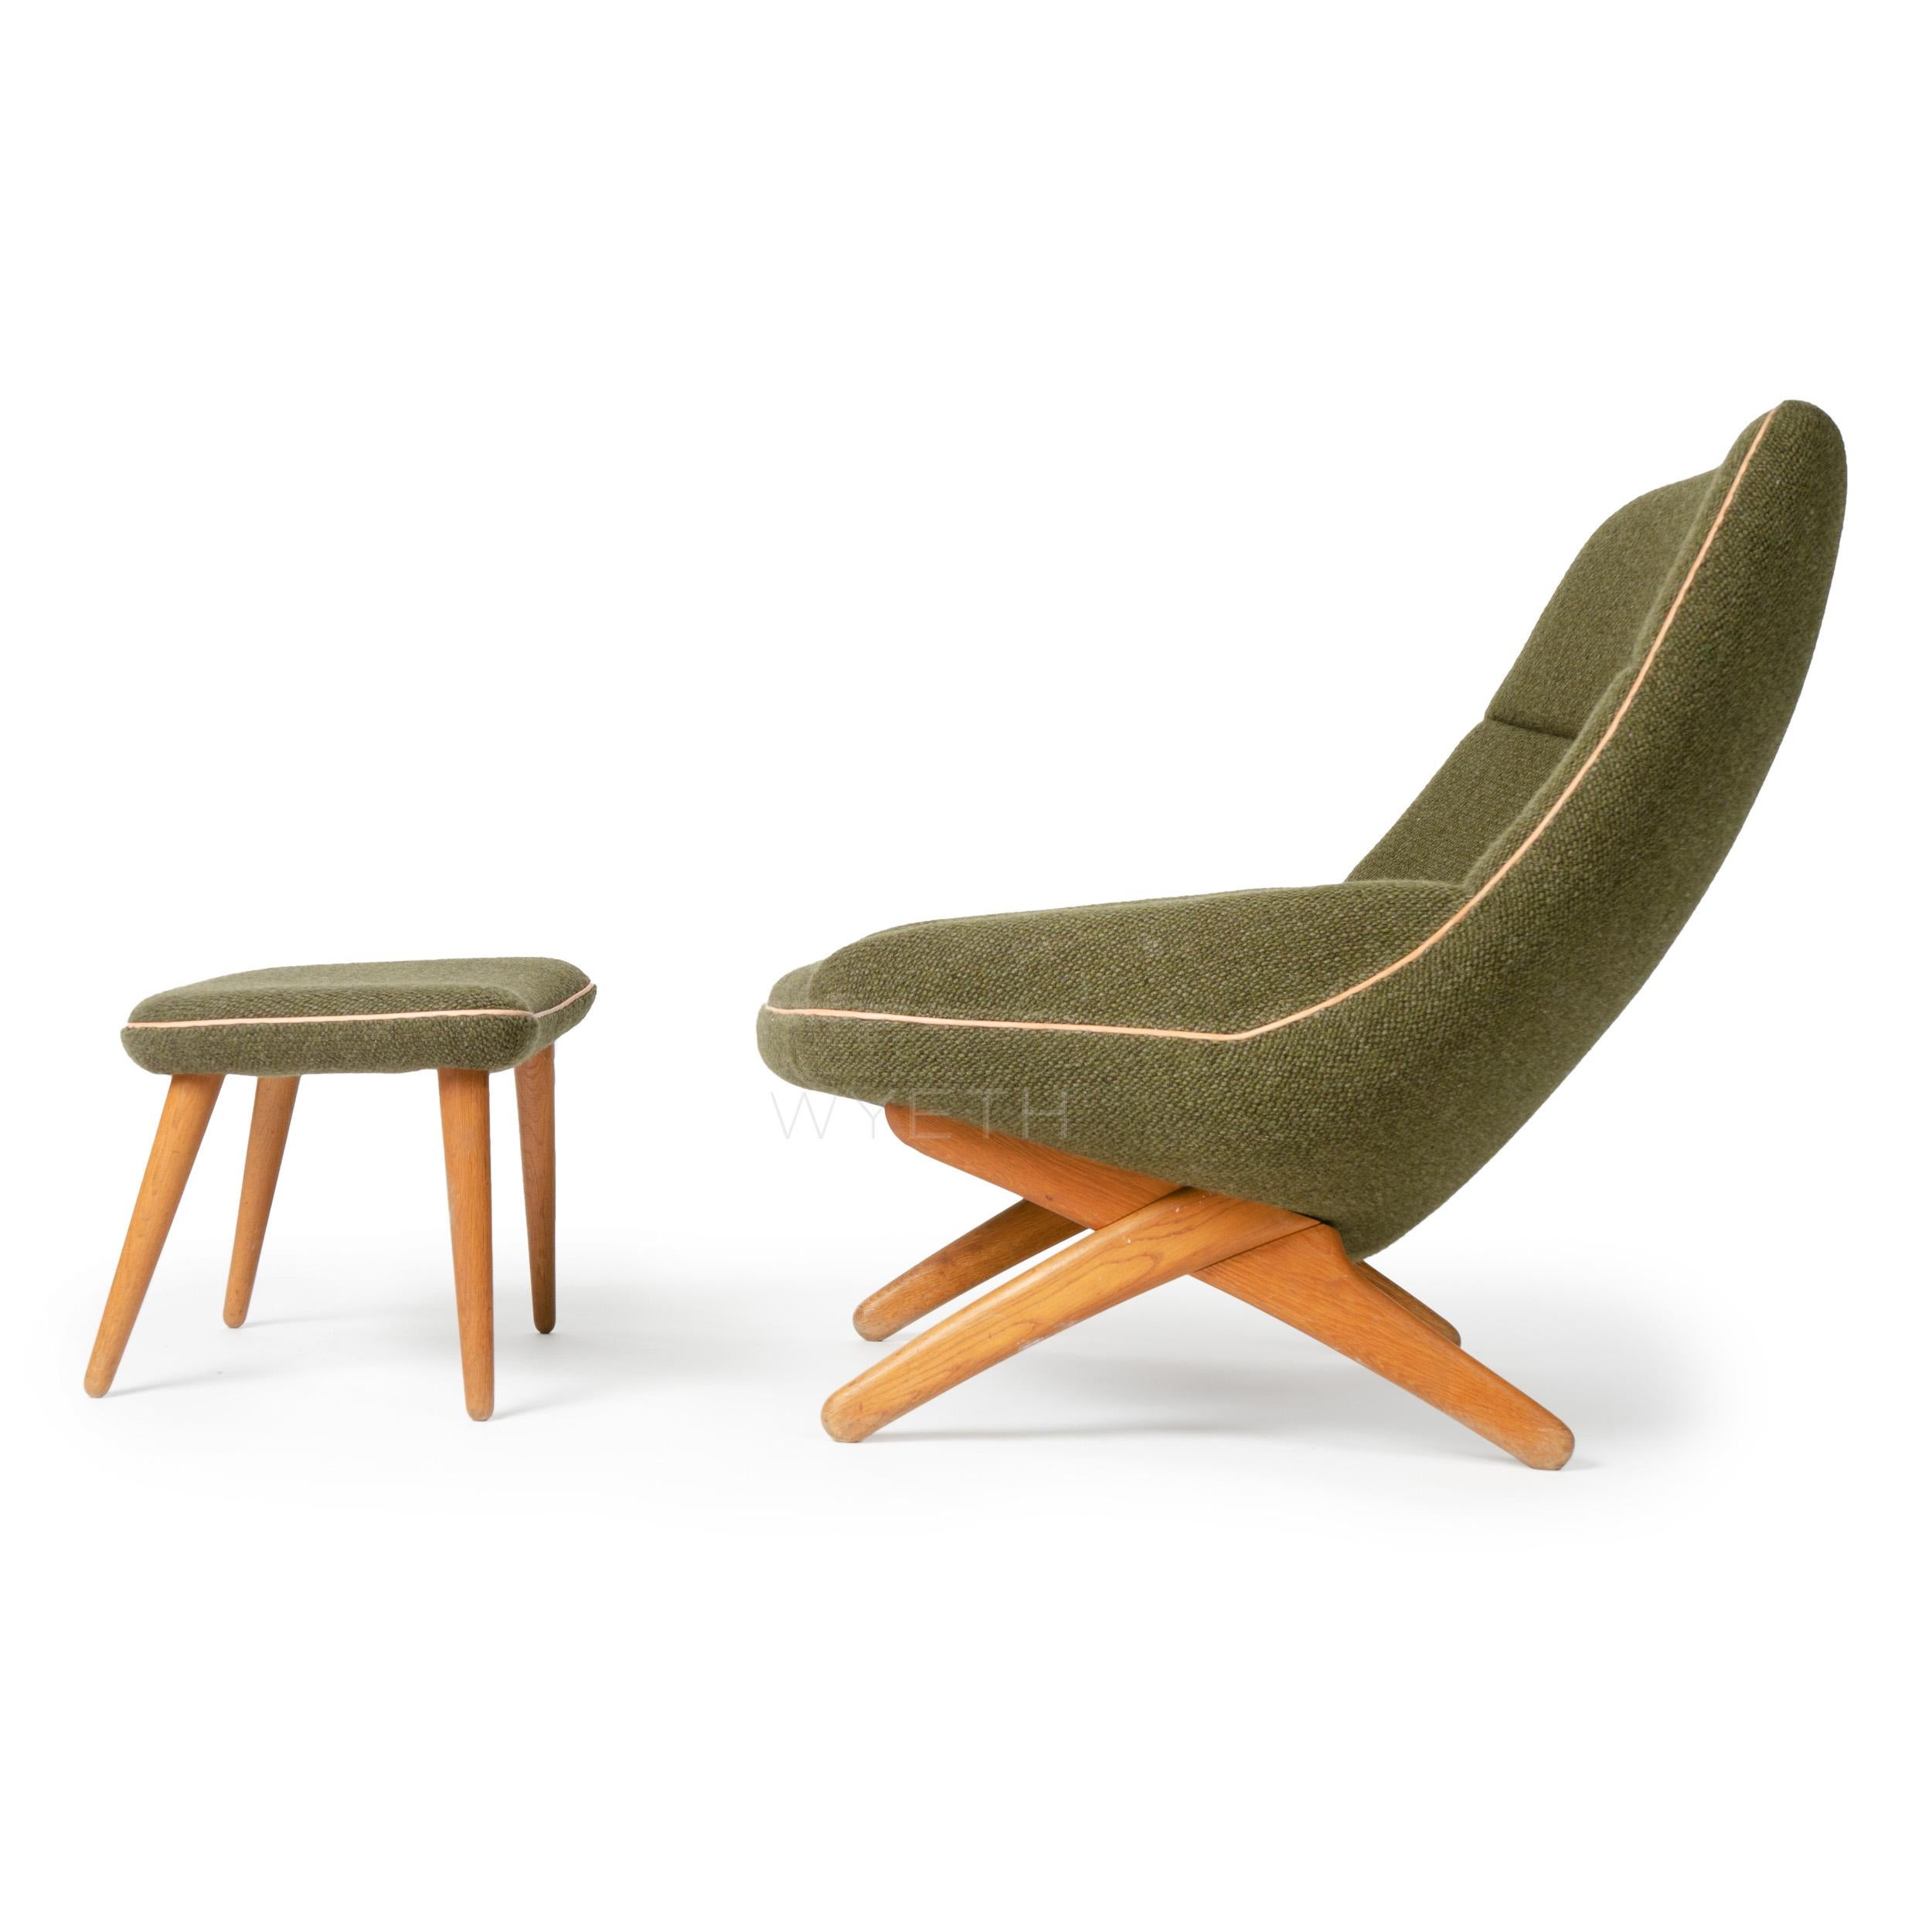 A sculptural upholstered lounge chair having crossed legs and an accompanying ottoman with turned-dowel legs in green upholstery with natural leather piping.